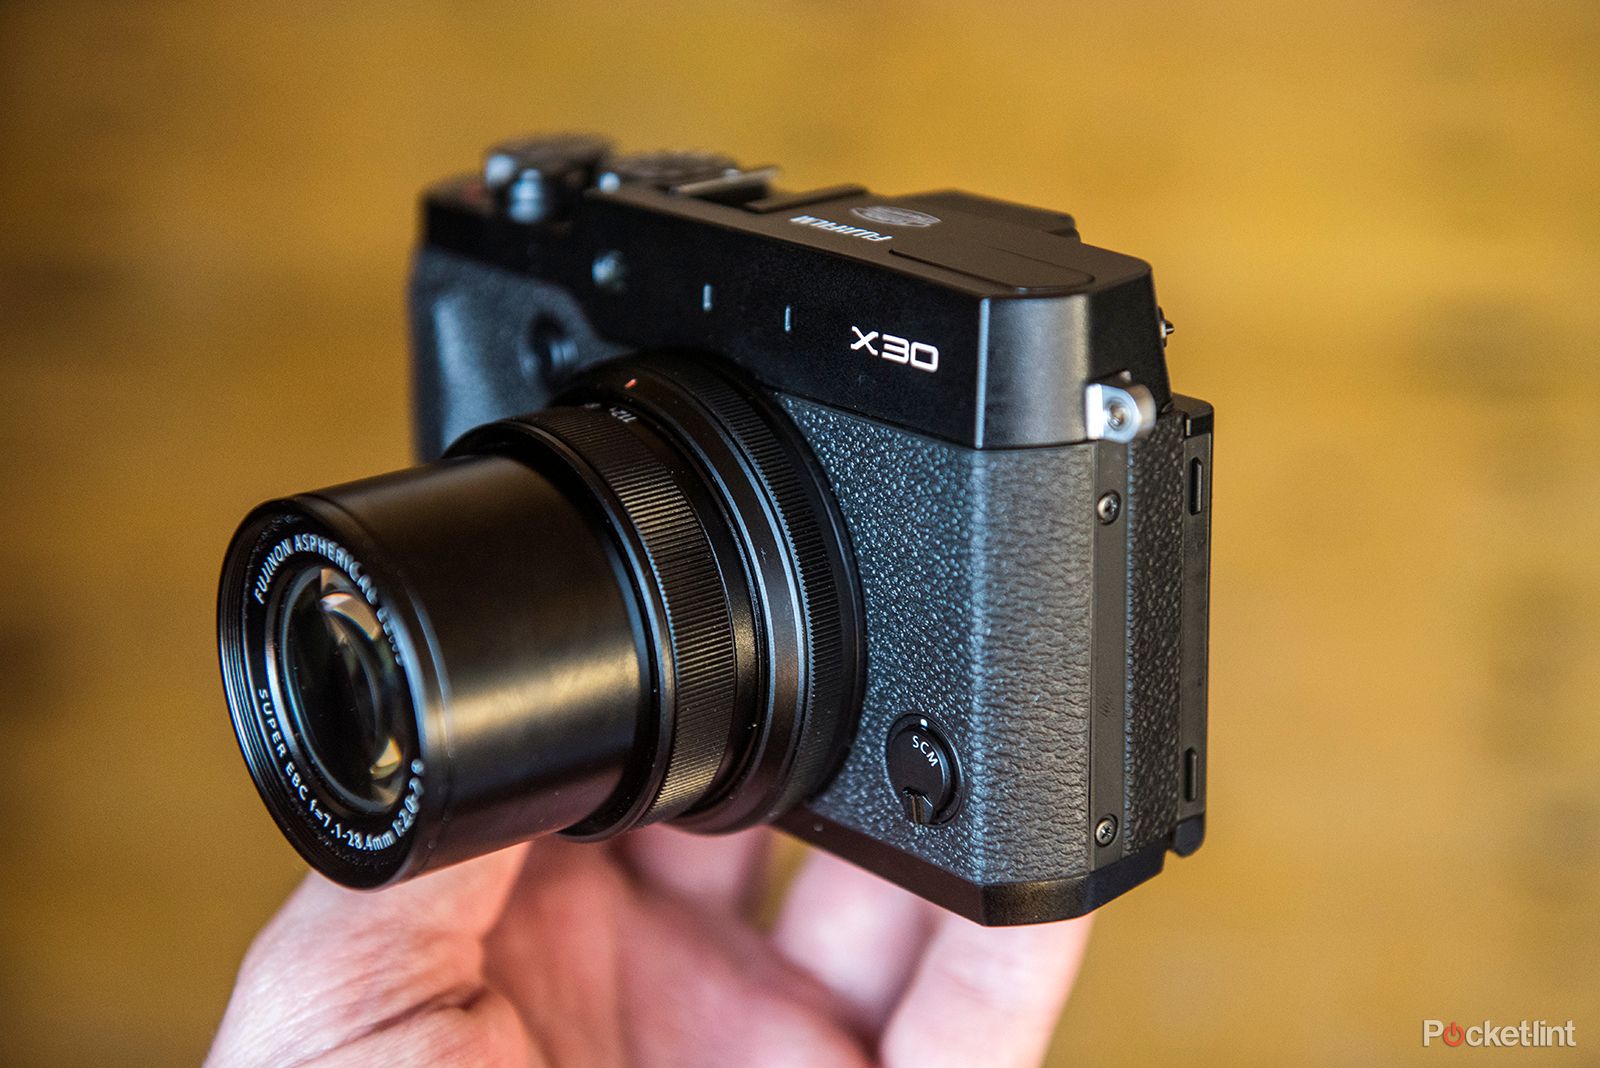 Fujifilm X30 review: Bigger and better, but beleaguered